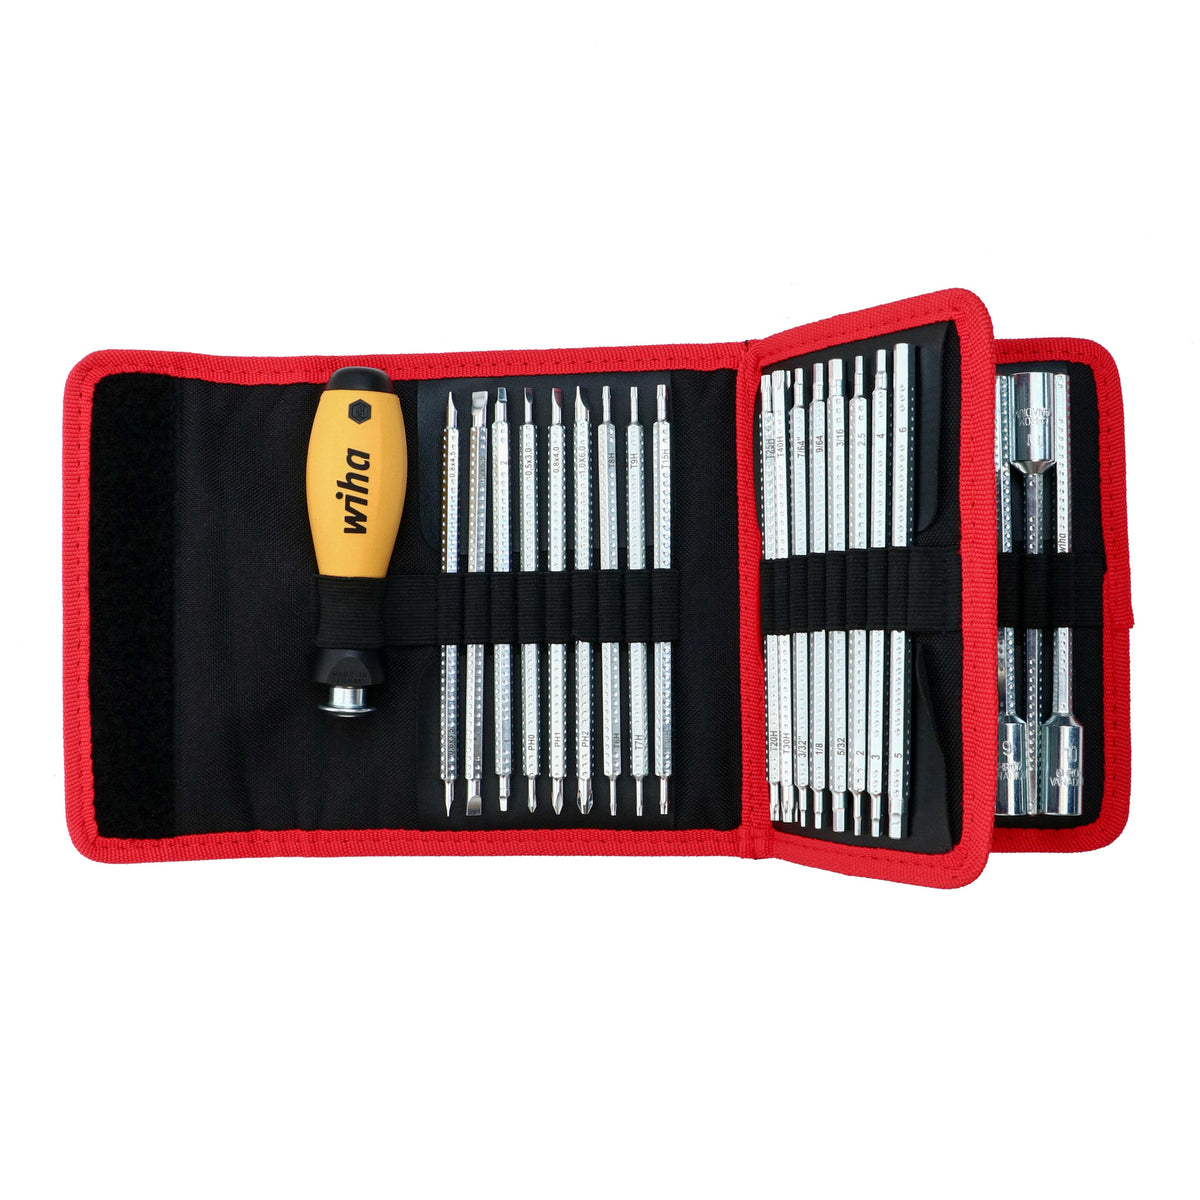 Wiha 28187 ESD Safe Drive-Loc VI Wallet 32Pc. Set Made in Germany